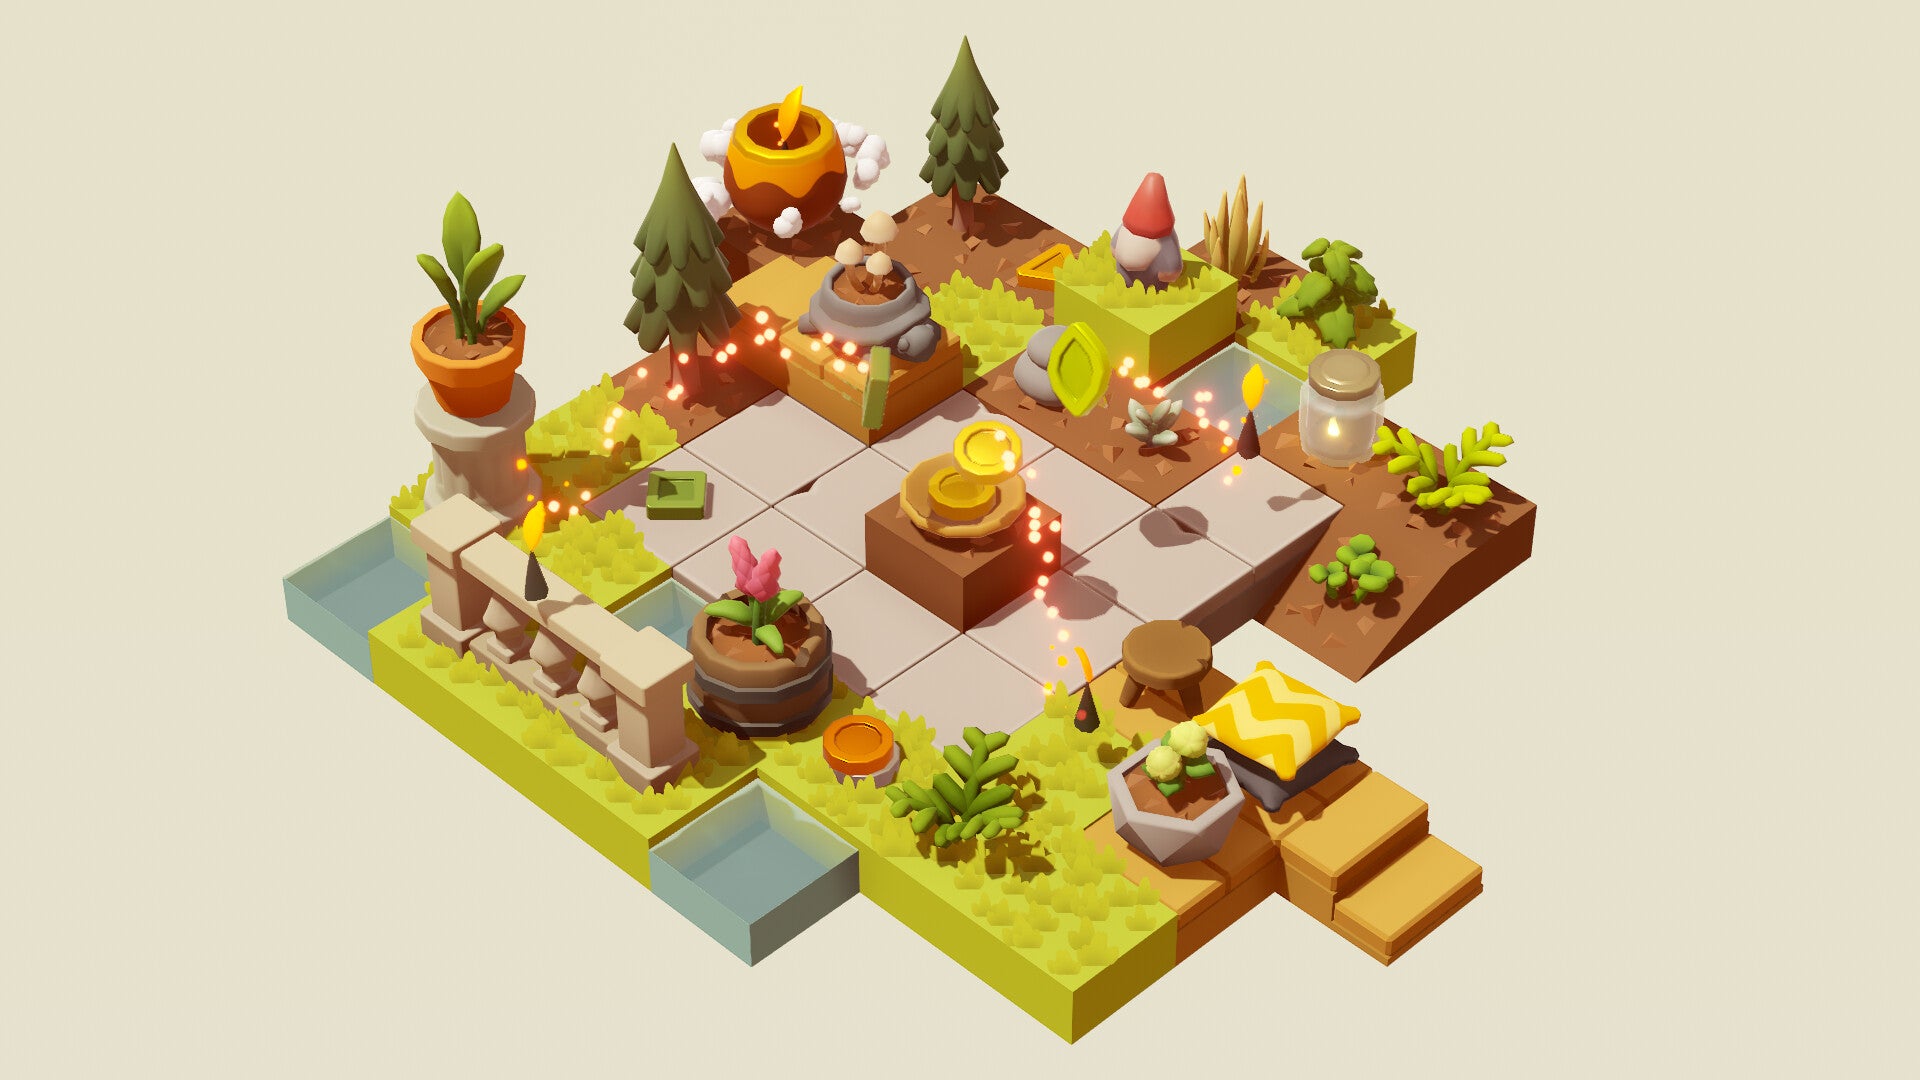 Garden Galaxy is a relaxing idle sandbox filled with pots and plants